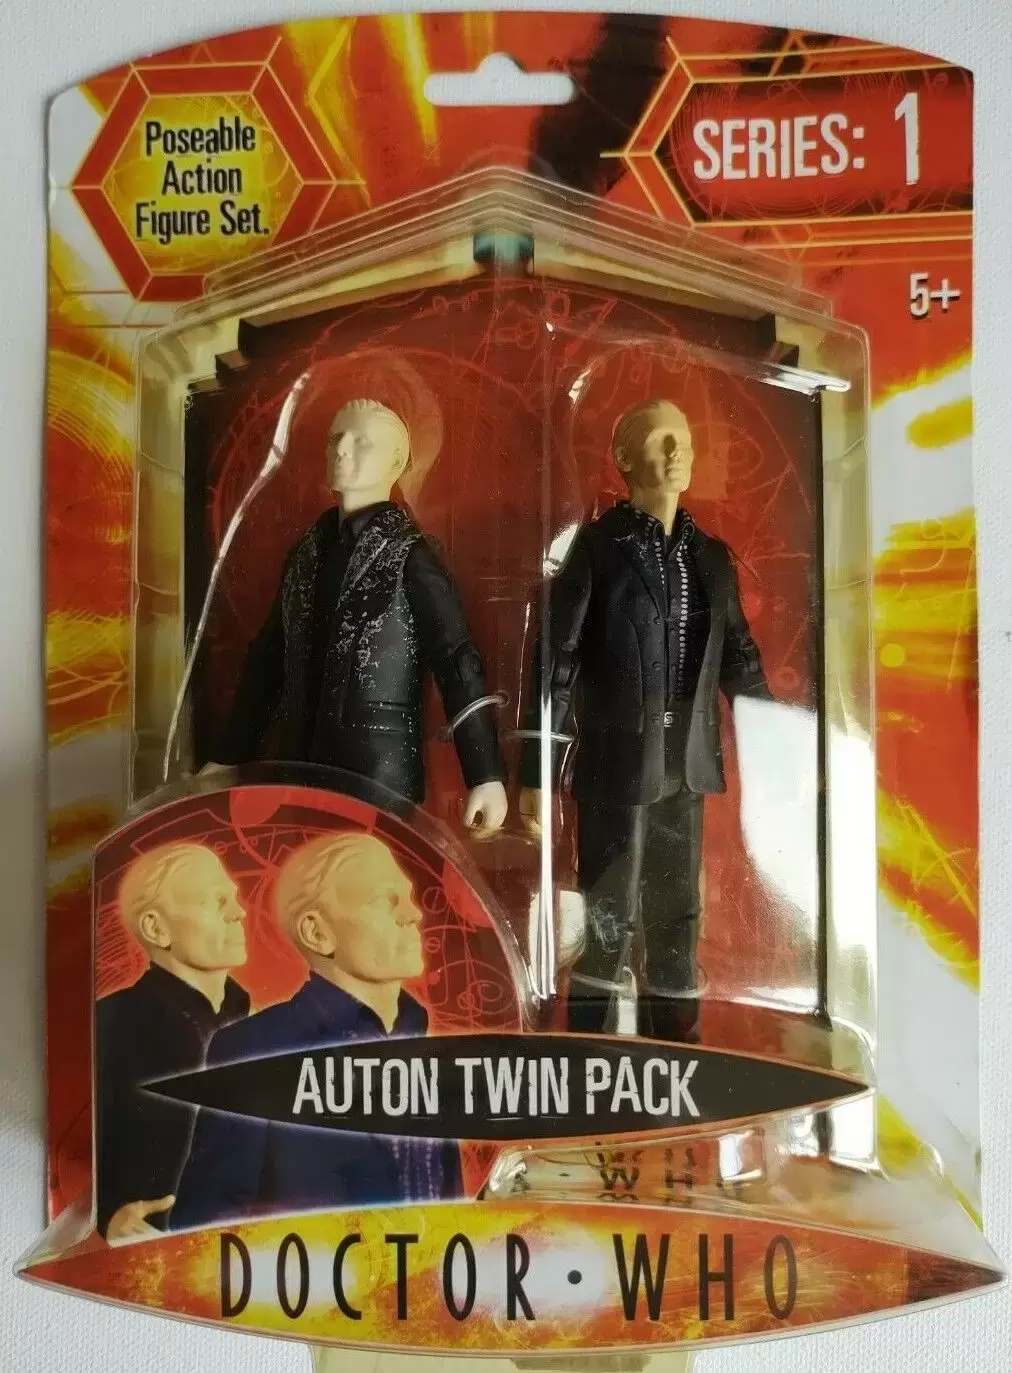 Action Figures - Auton Twin Pack